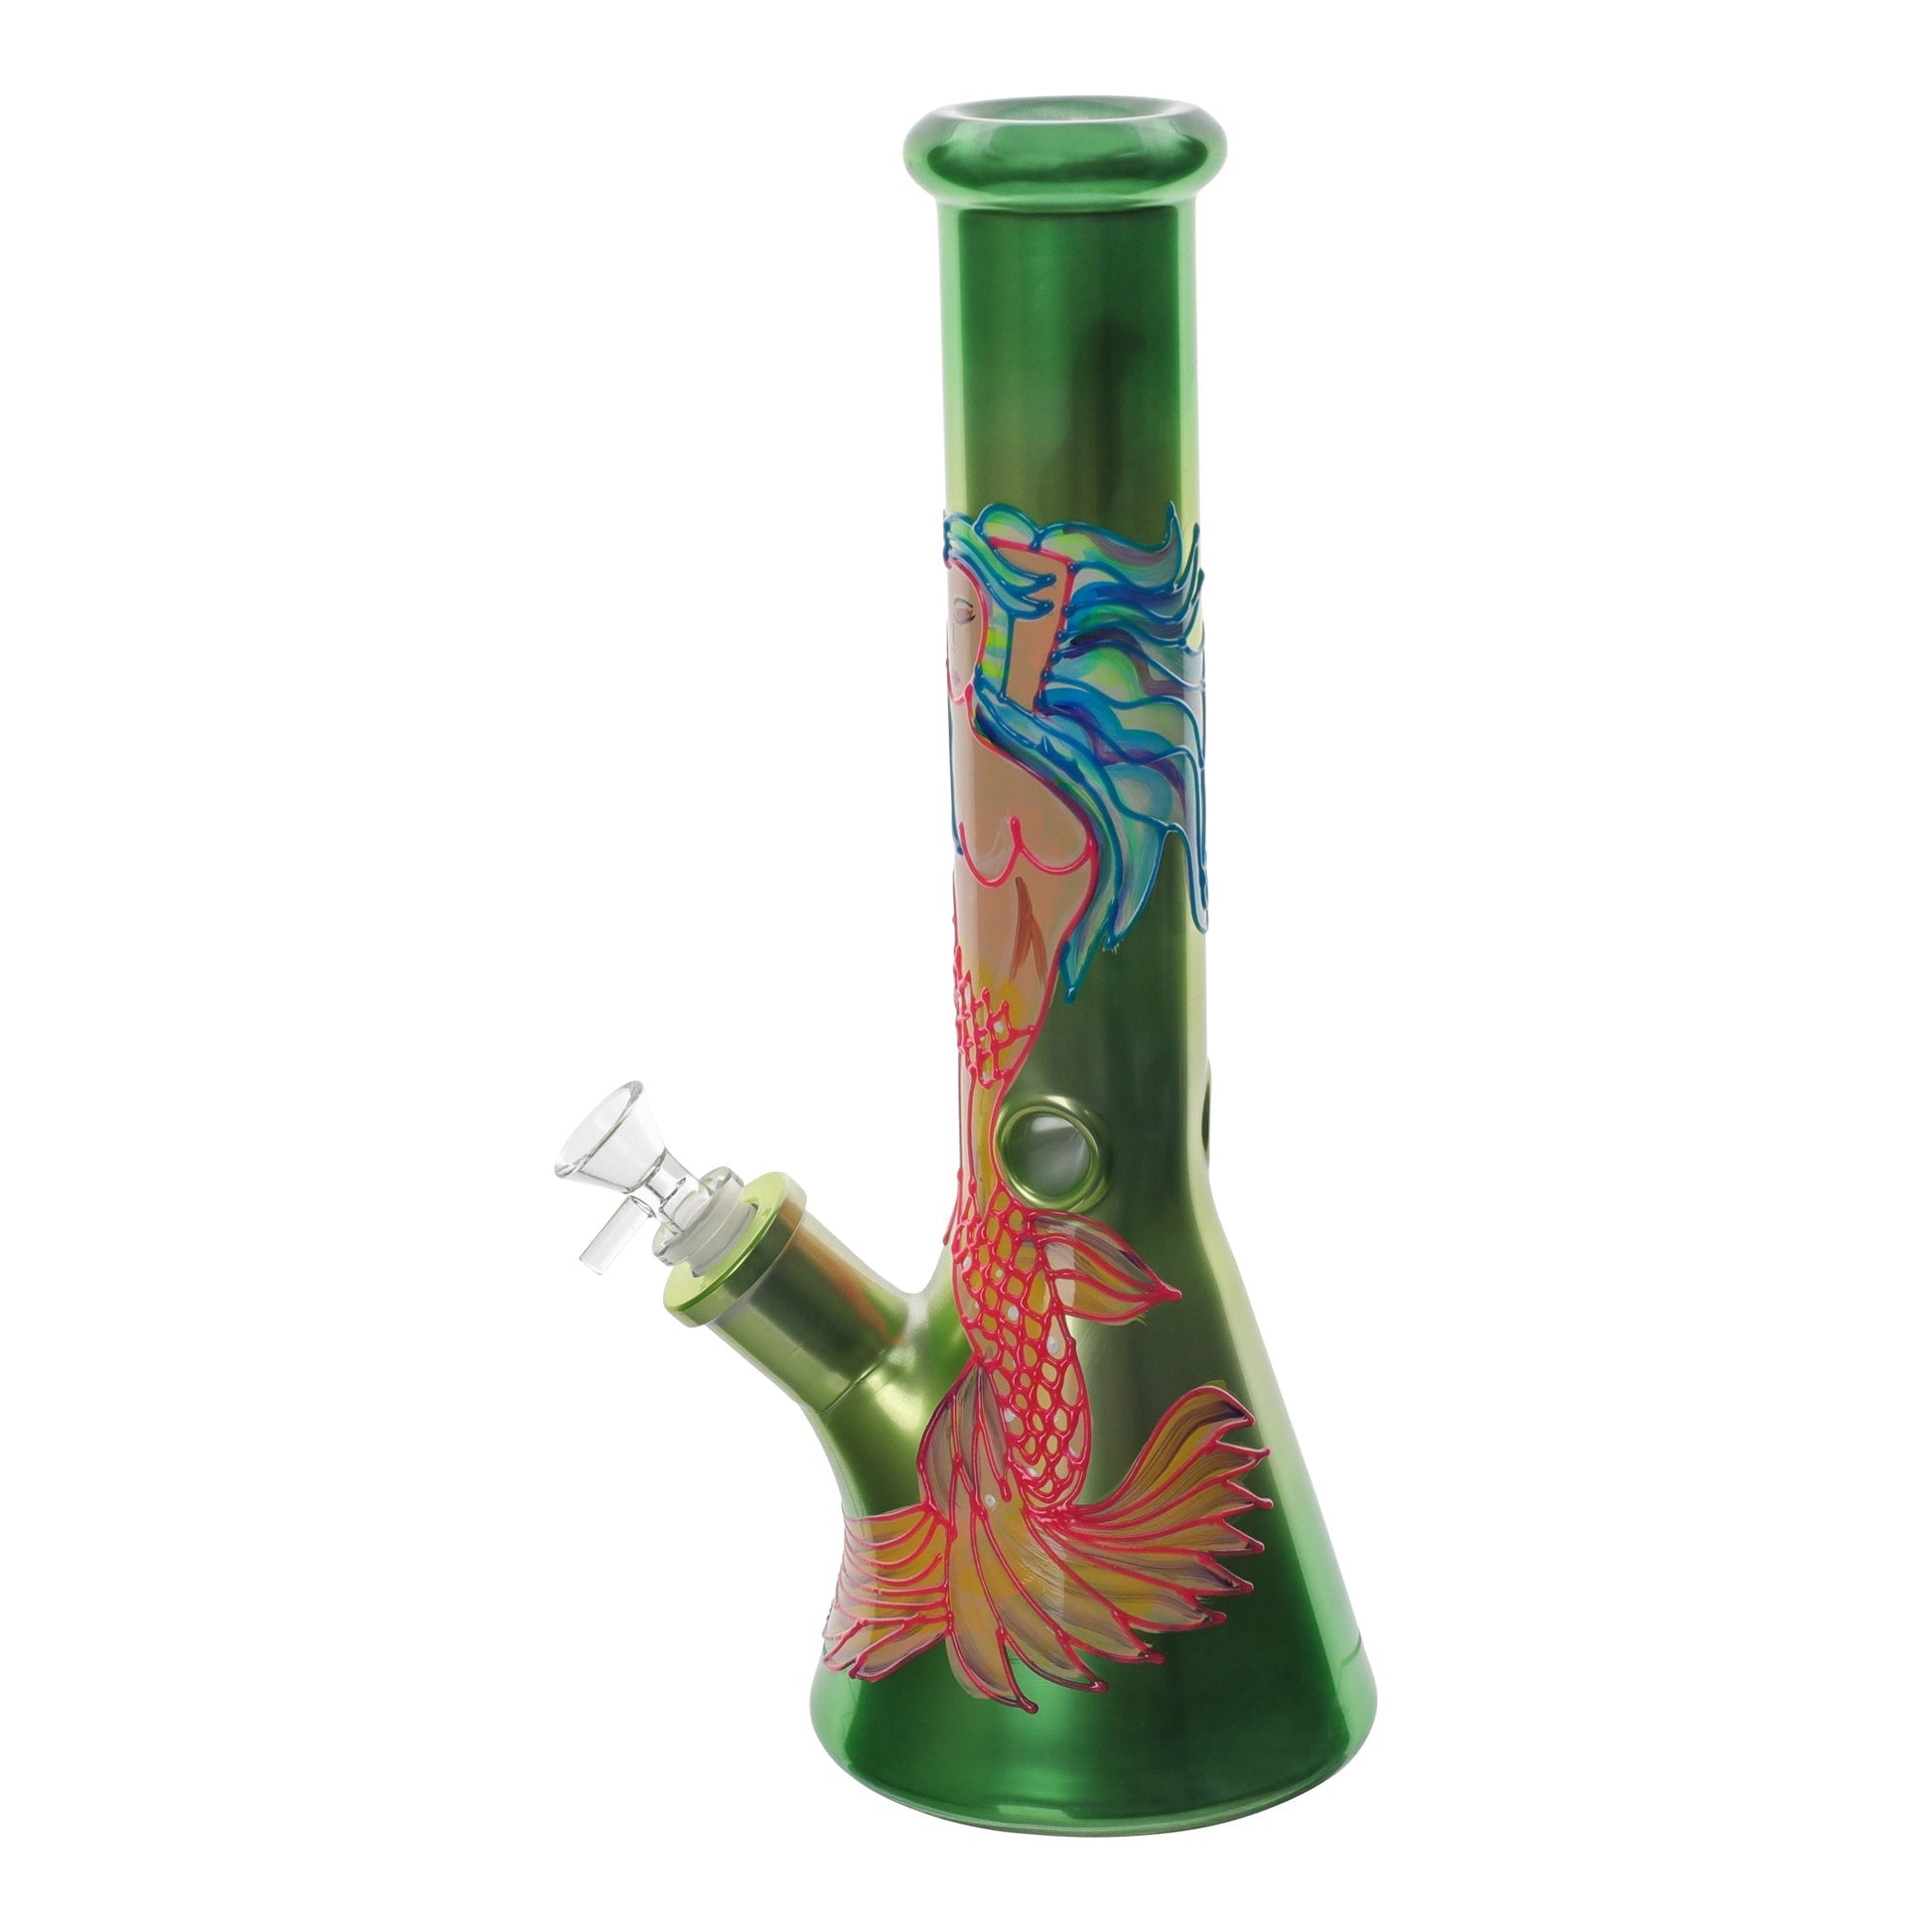 The Glowing Graphic Beaker Bong - 14in